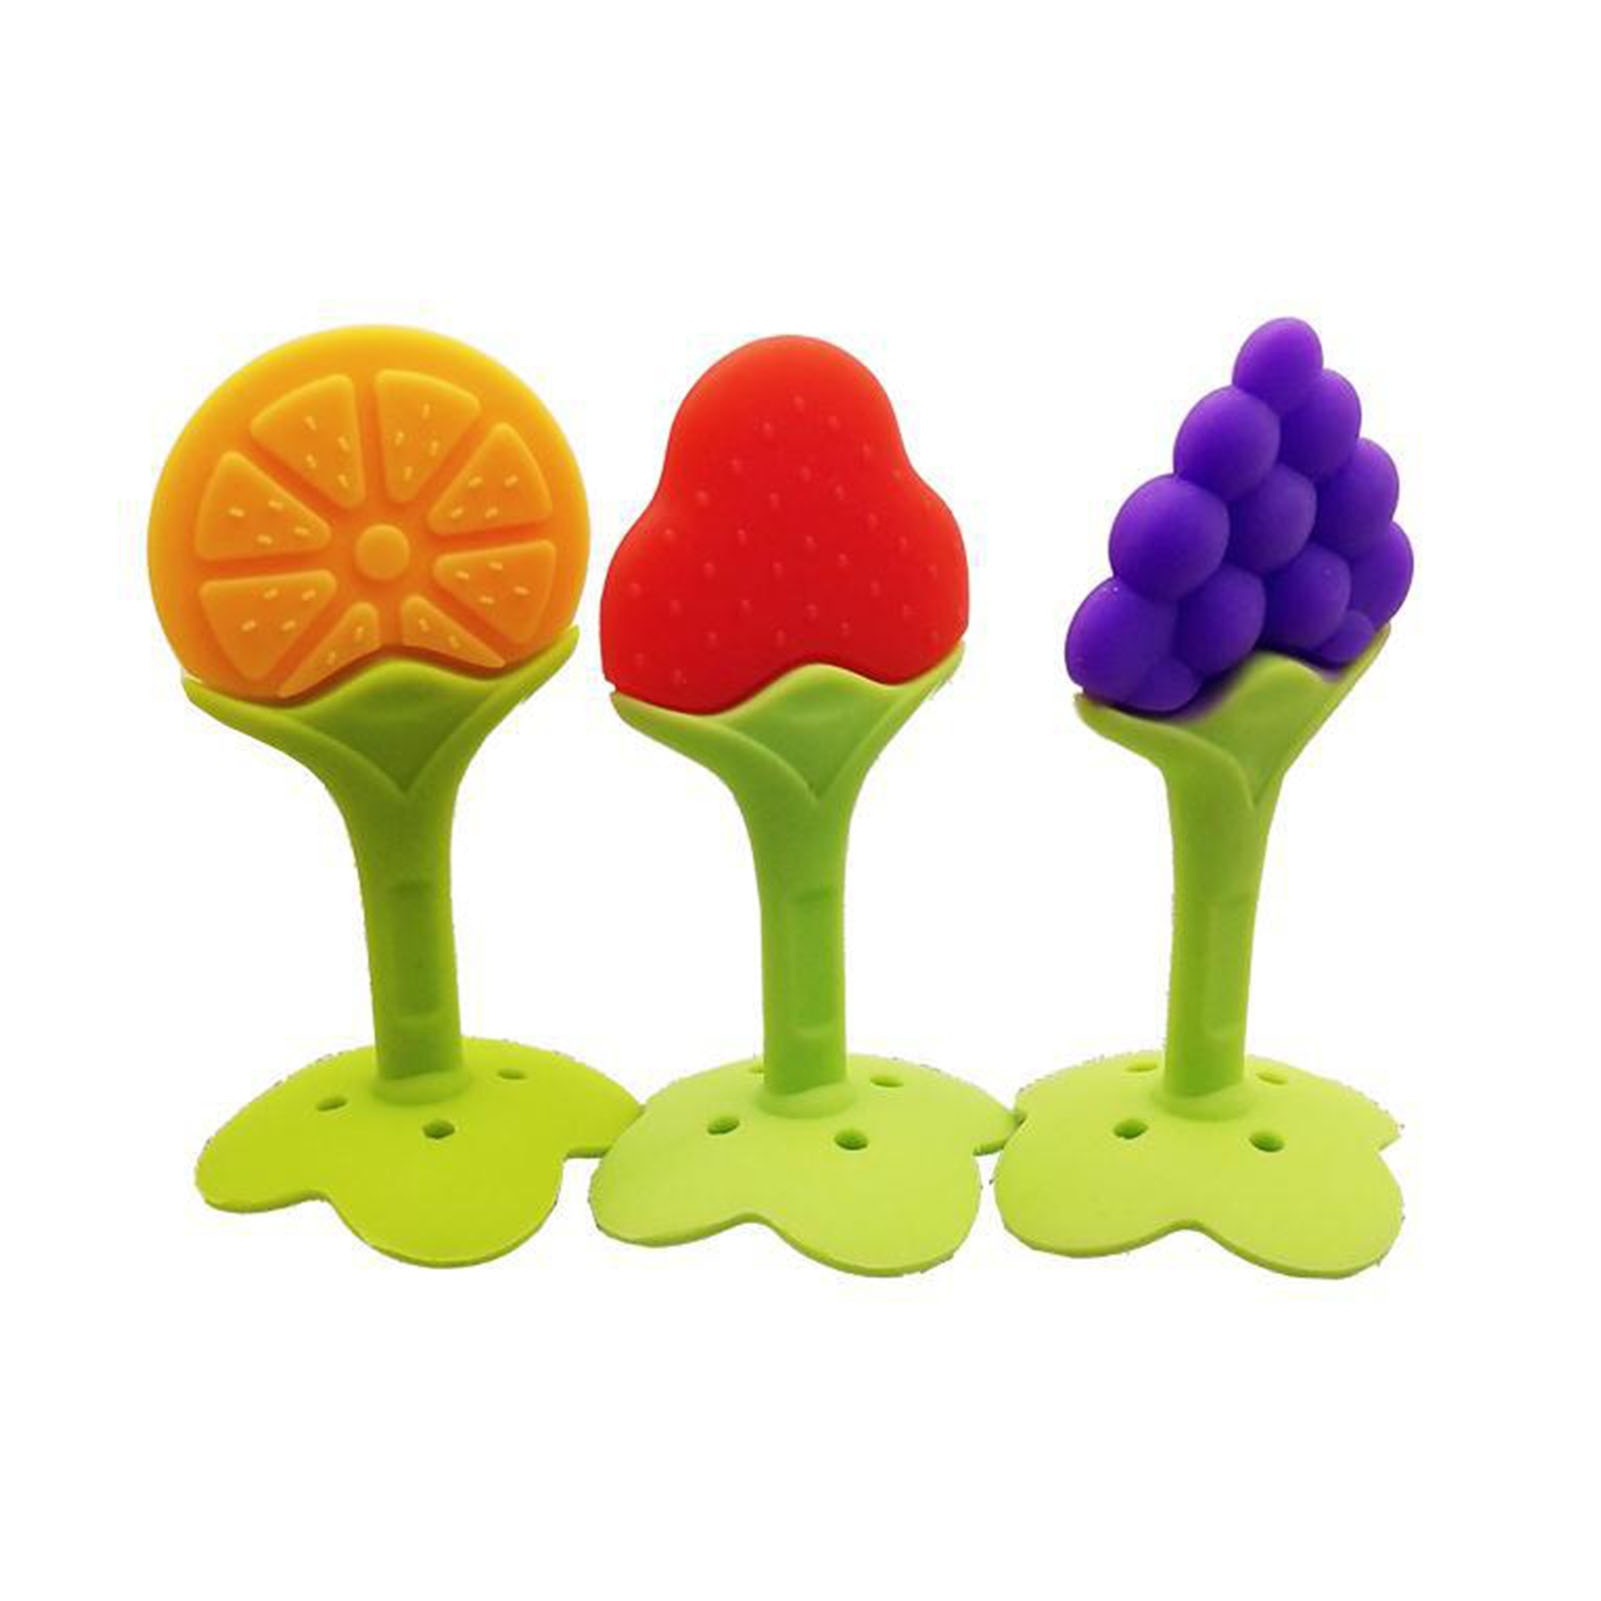 1pcs Comfortable Teether Banana Safety BPA Free Food Grade Silicone Fruit Babies Infant Kids Toothbrush Toys Baby Chewing Toy